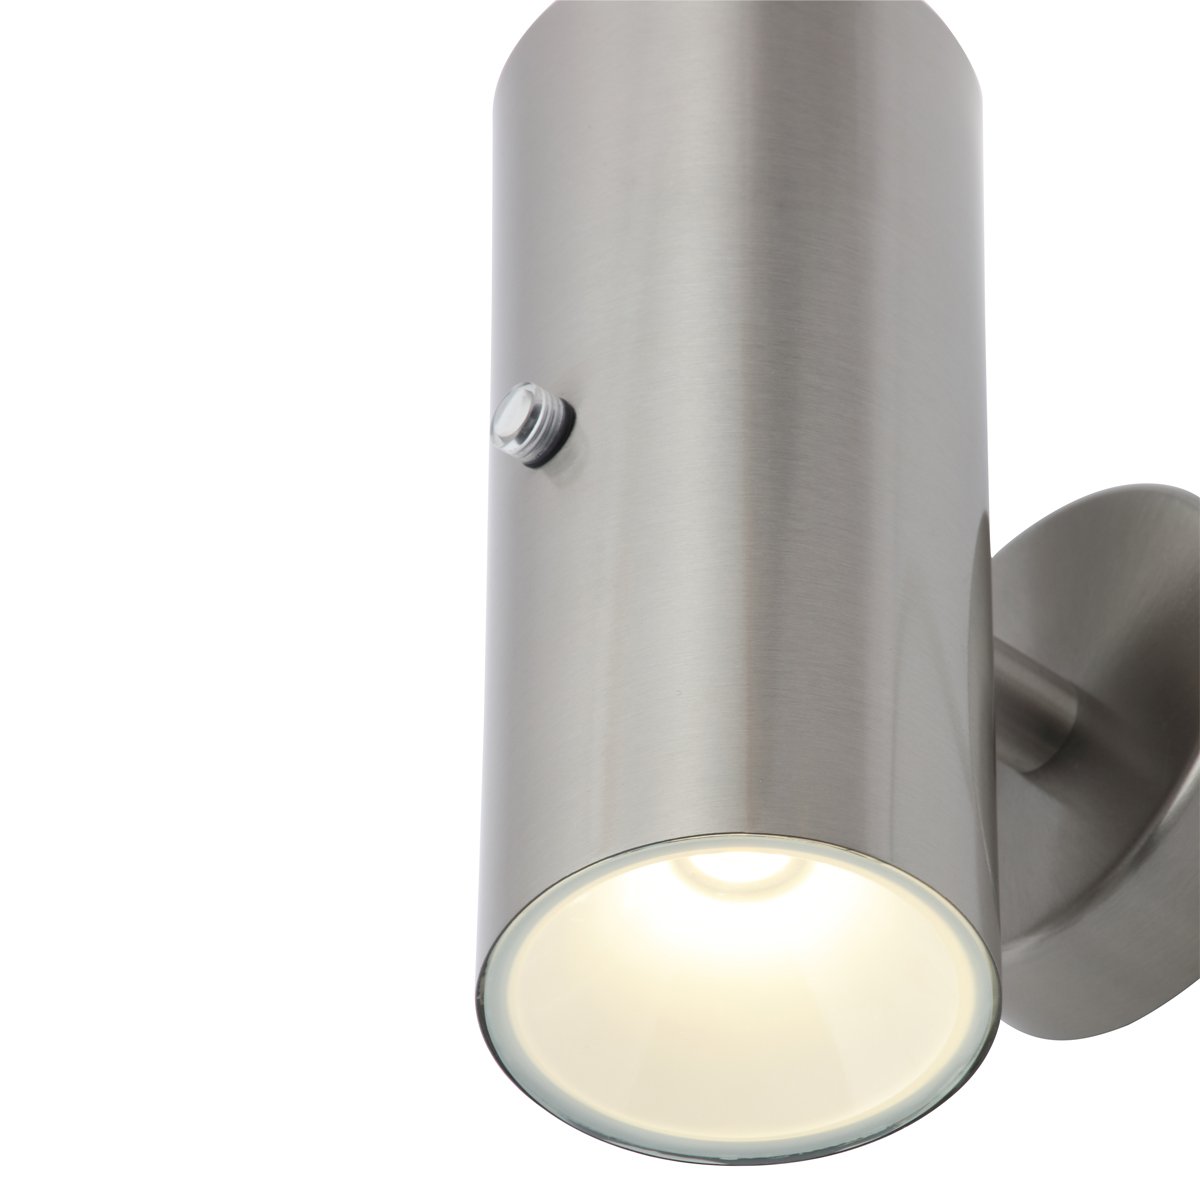 CGC VERITY Stainless Steel LED Outdoor Wall Spotlight With Photocell Sensor